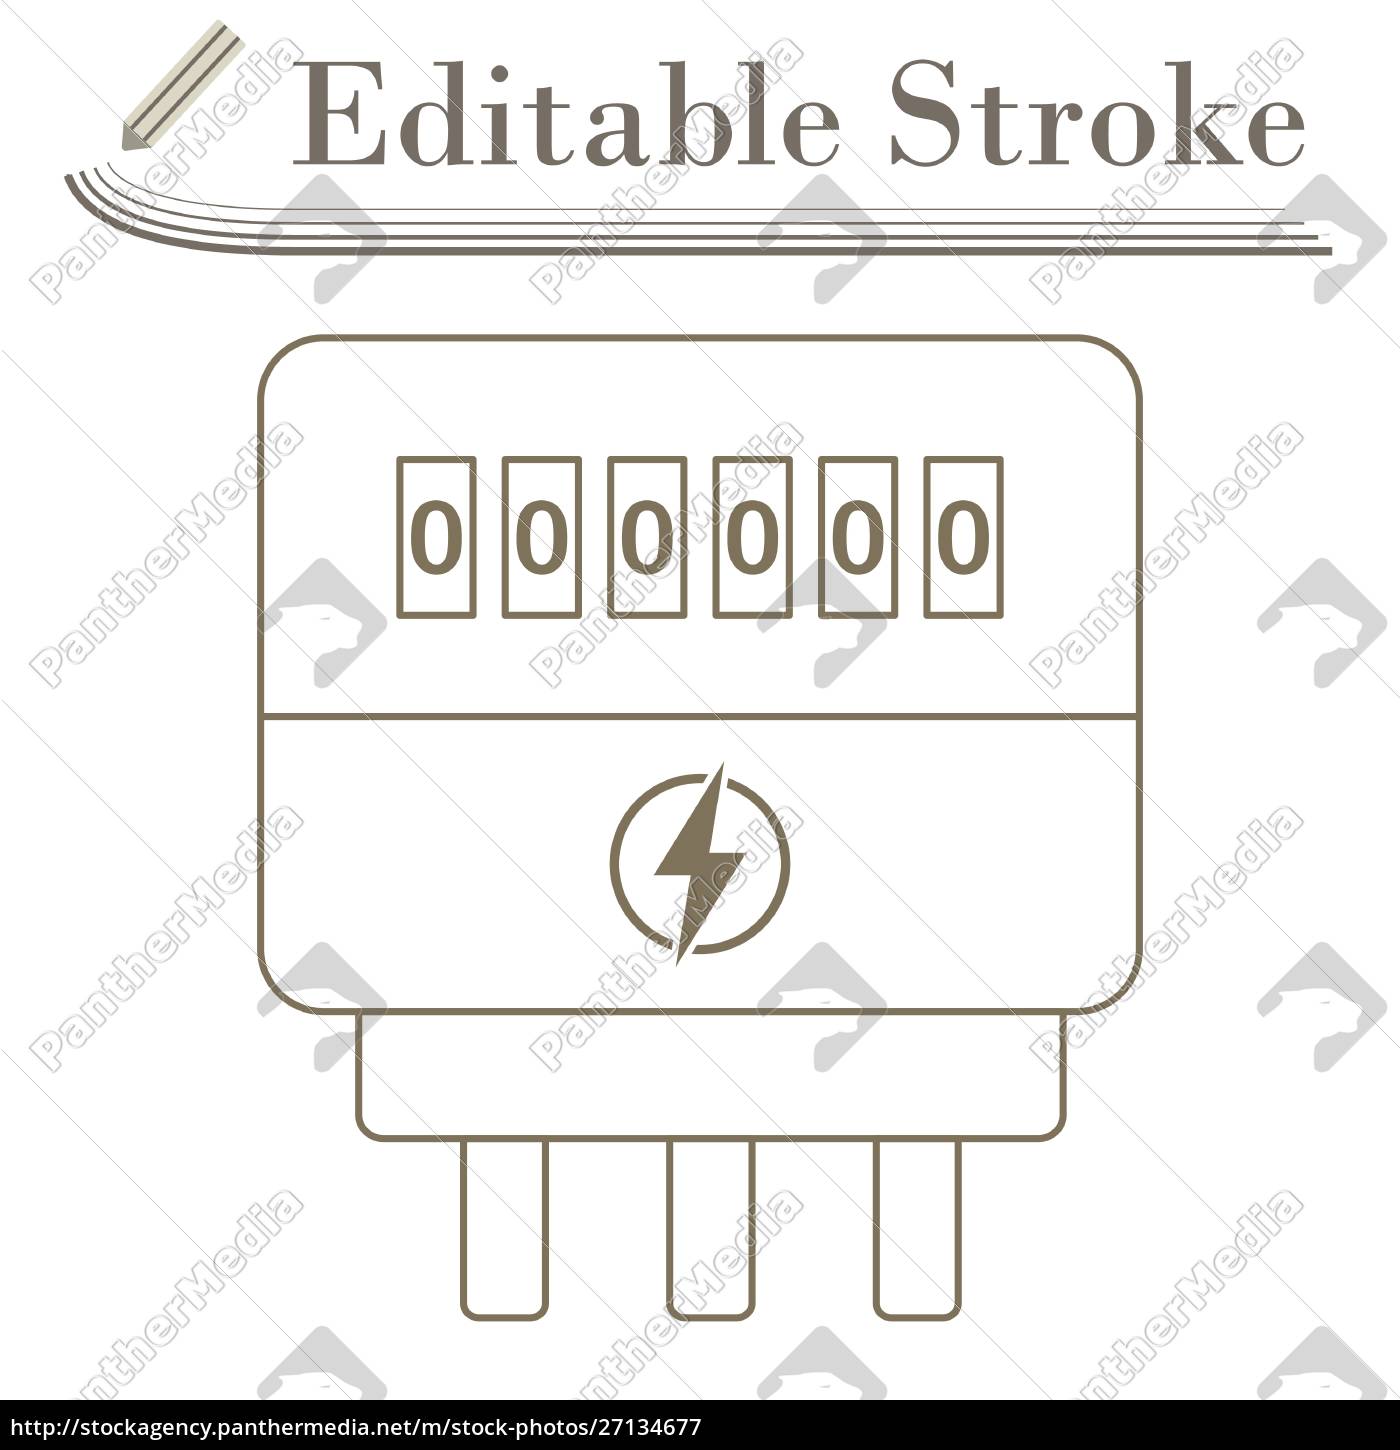 electric meter icon